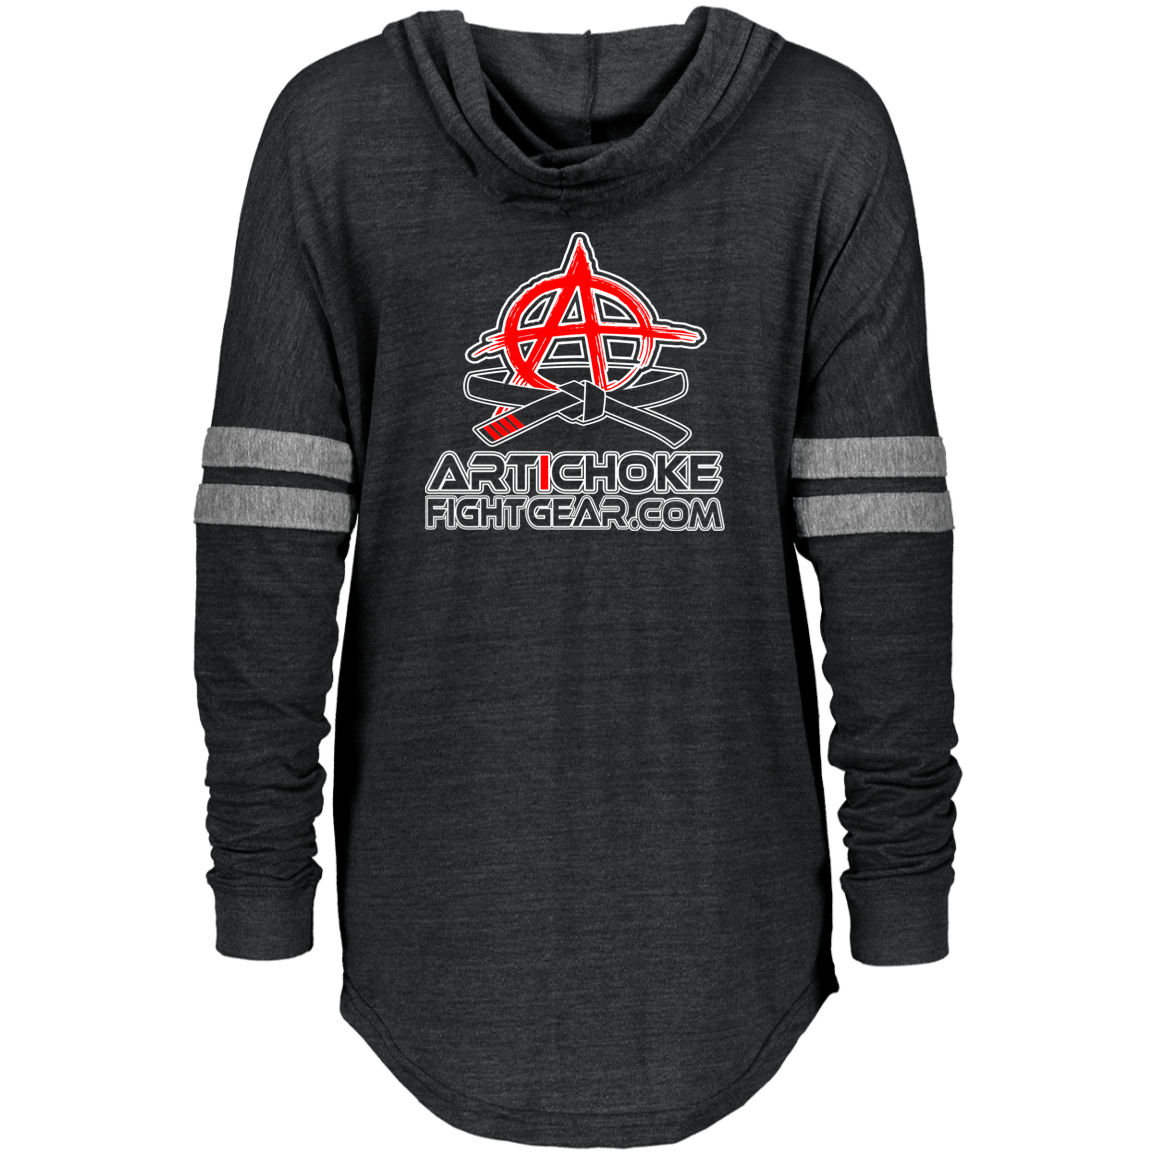 Artichoke Fight Gear Custom Design #12. Keep Calm and Shrimp Out. Ladies Hooded Low Key Pullover